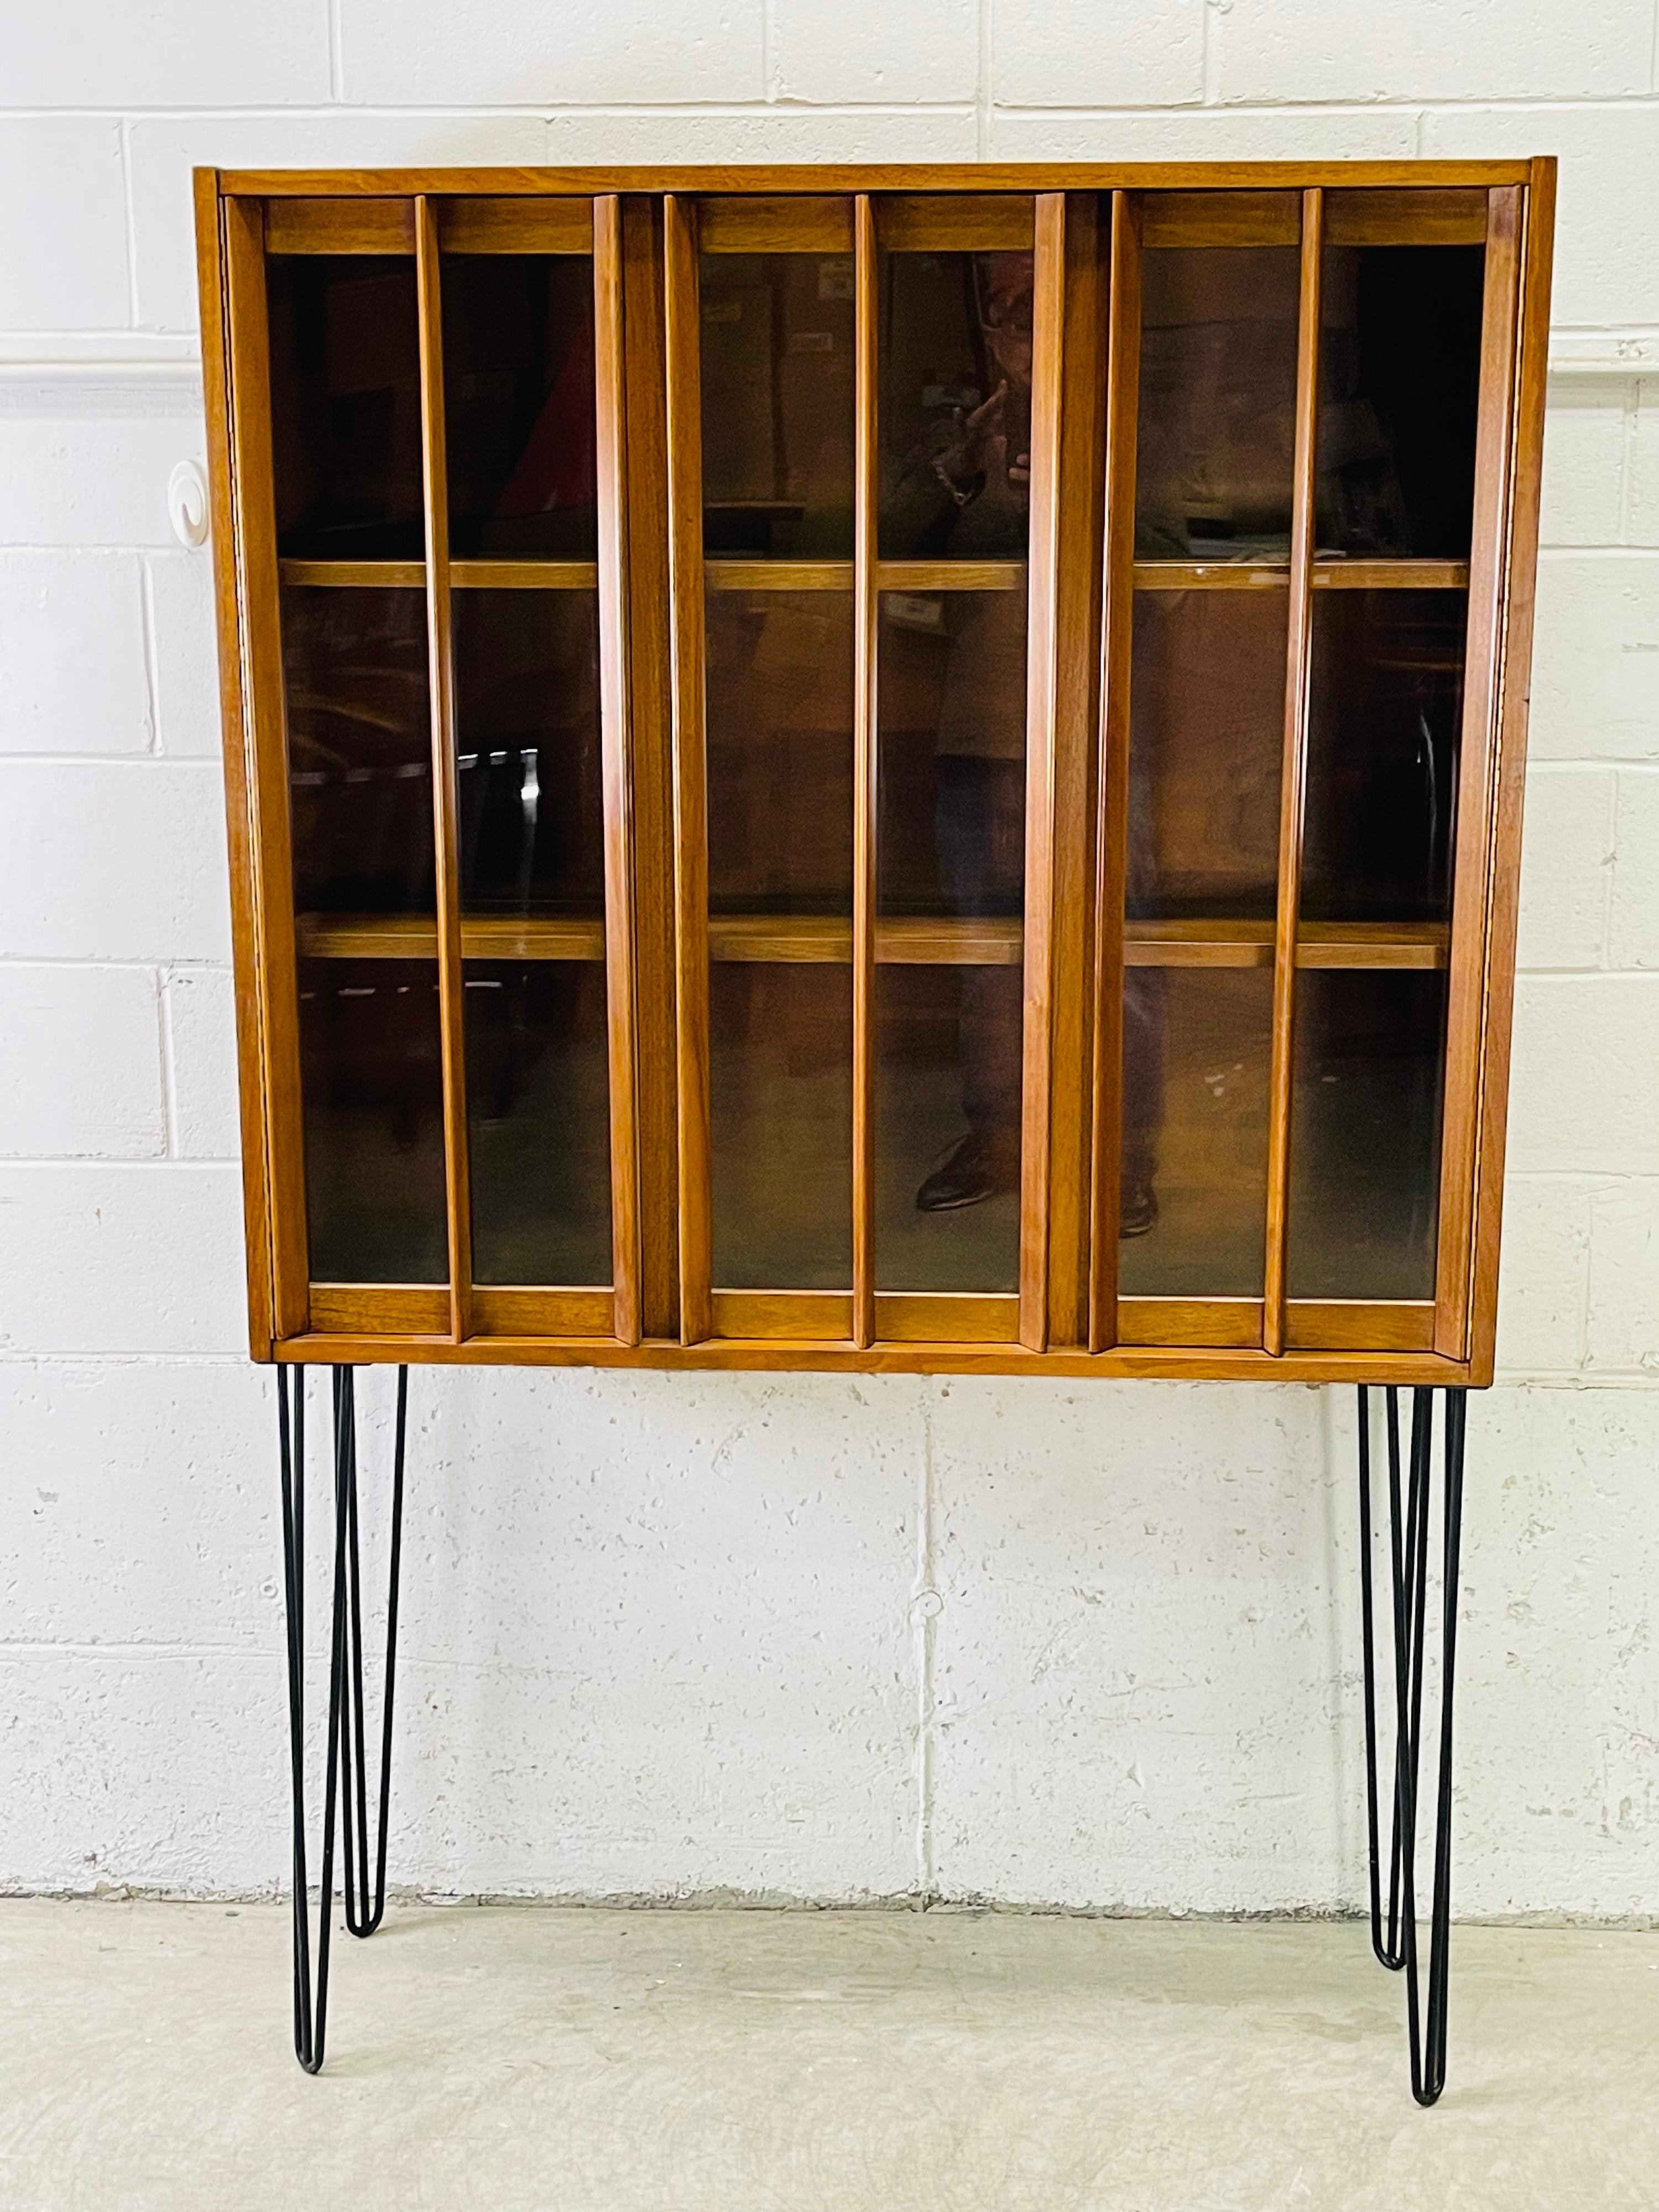 Vintage 1960s walnut wood and glass front tall display cabinet on iron hairpin legs. There are three sections for display and the shelves are 10” deep. The shelves are not adjustable. No marks.